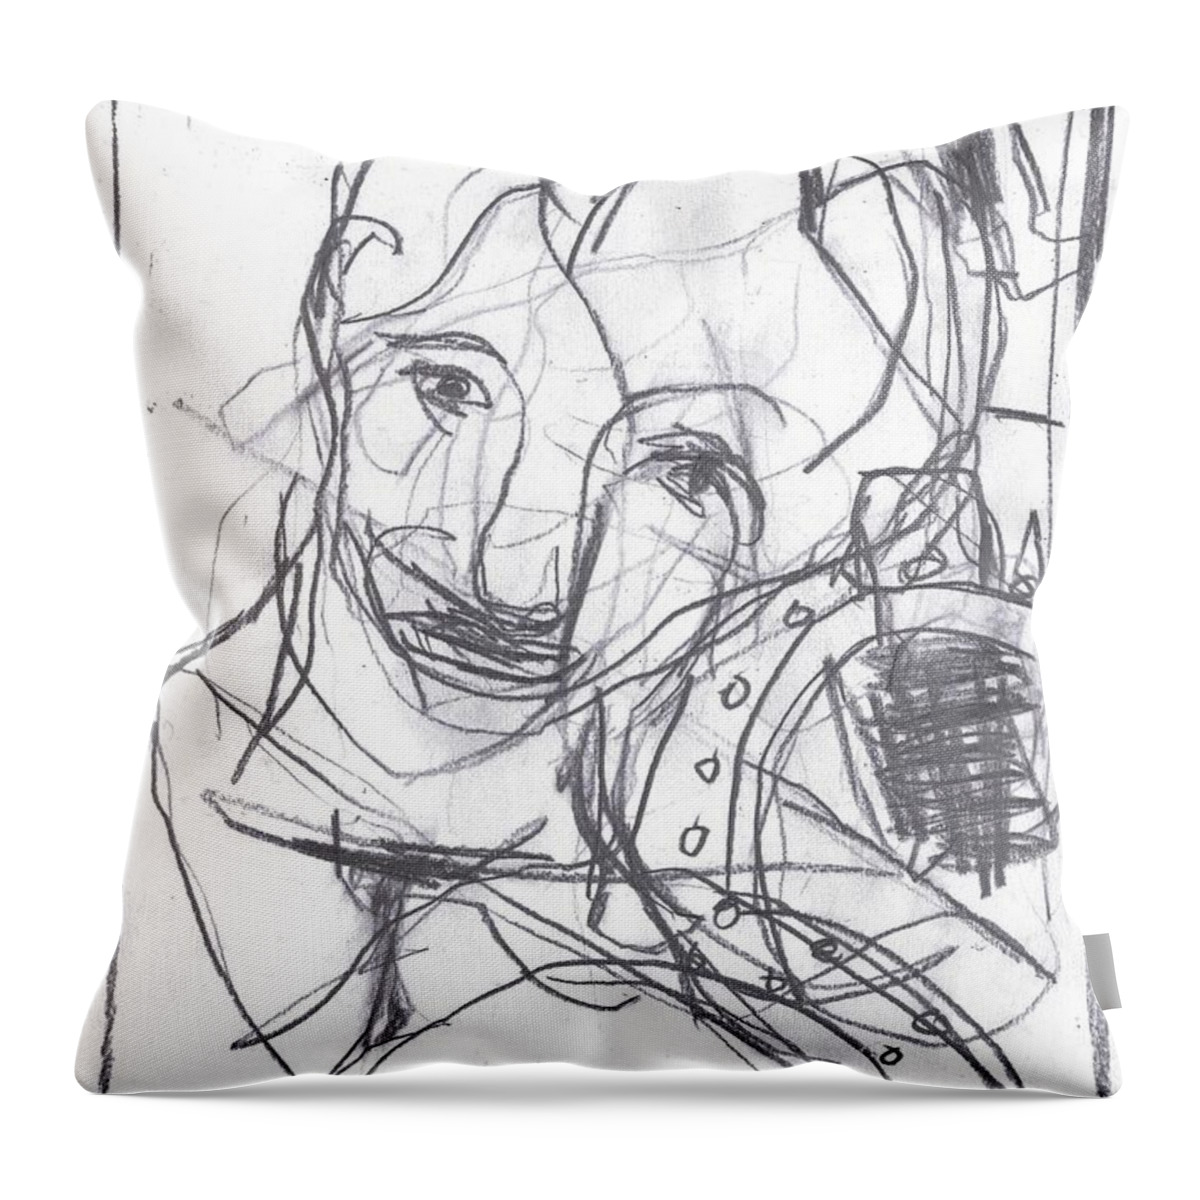 Sketch Throw Pillow featuring the drawing For b story 4 1 by Edgeworth Johnstone